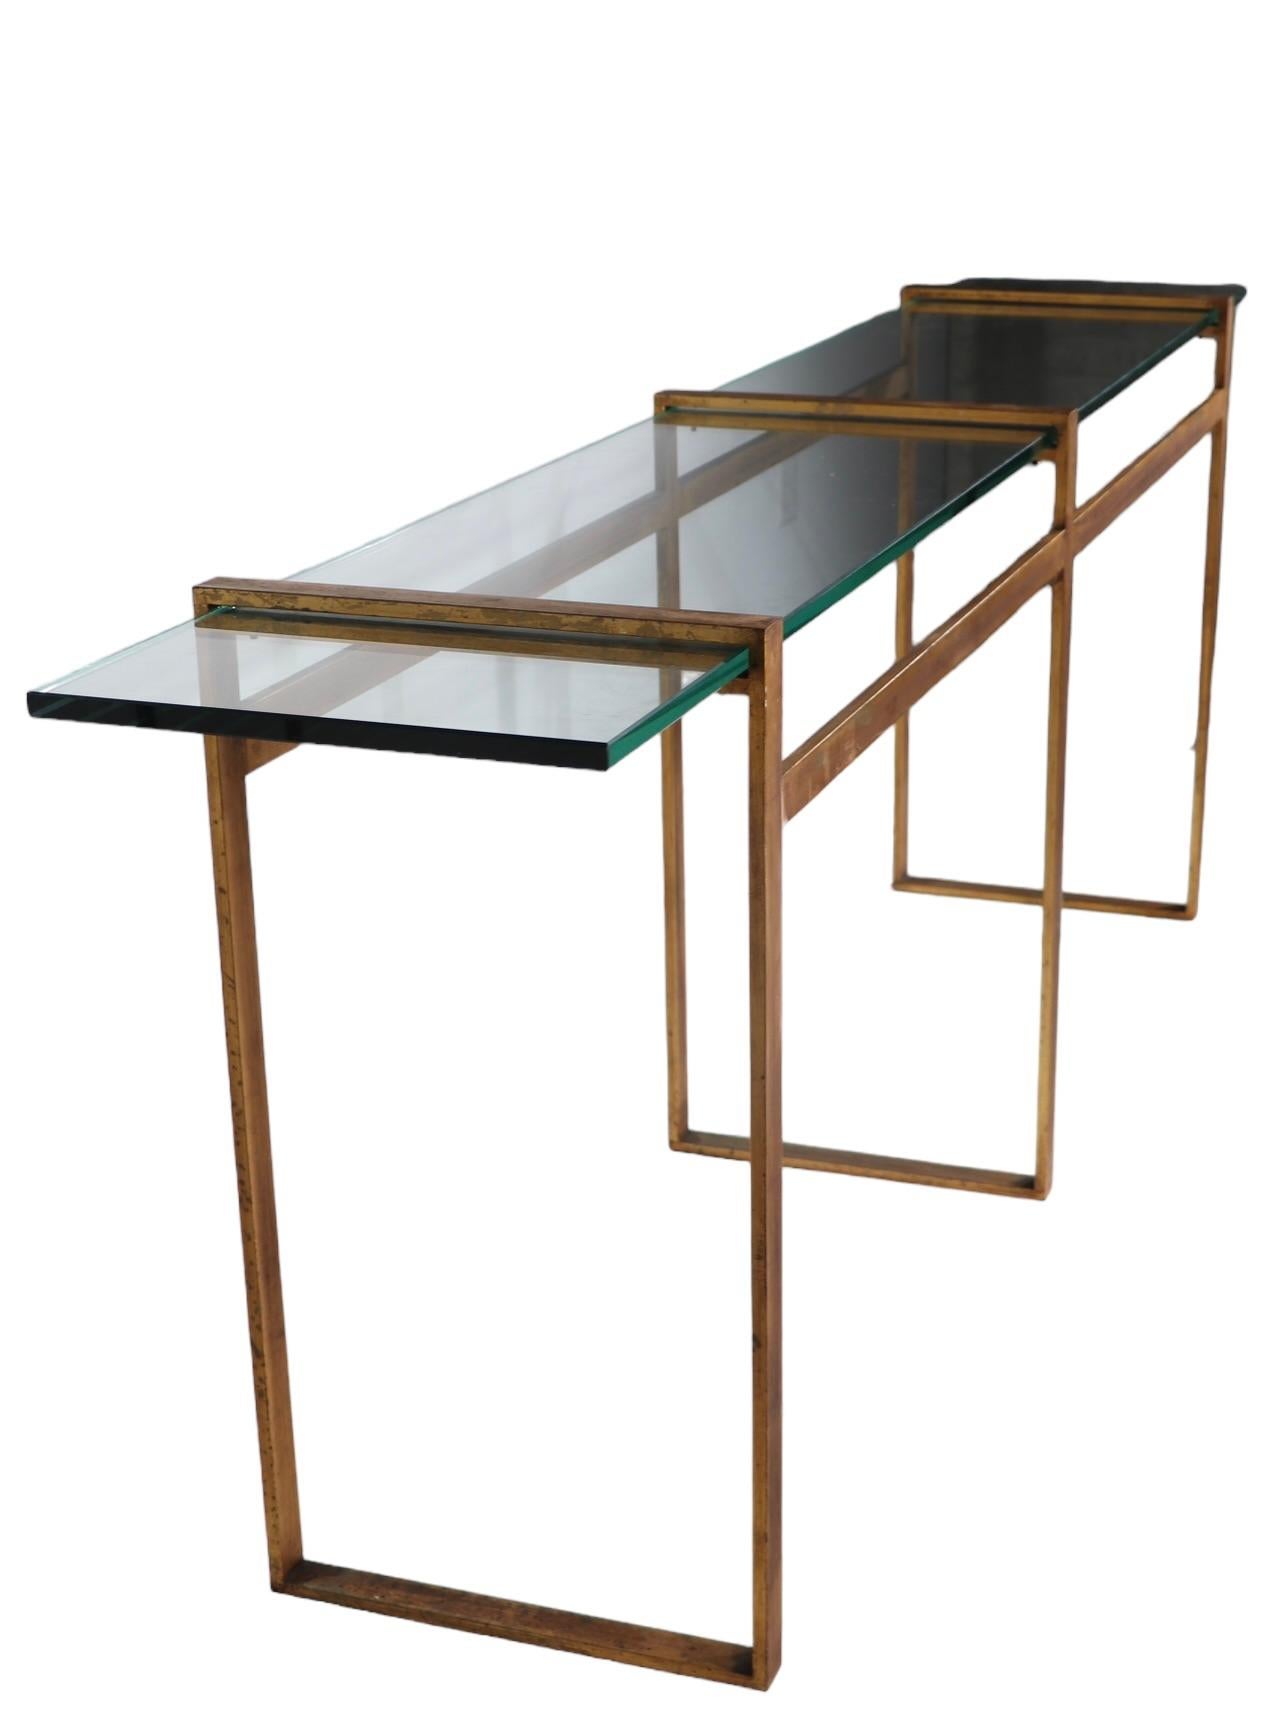 Large Modernist Metal and Glass Console in Faux Gilt Finish c 1970’s For Sale 4